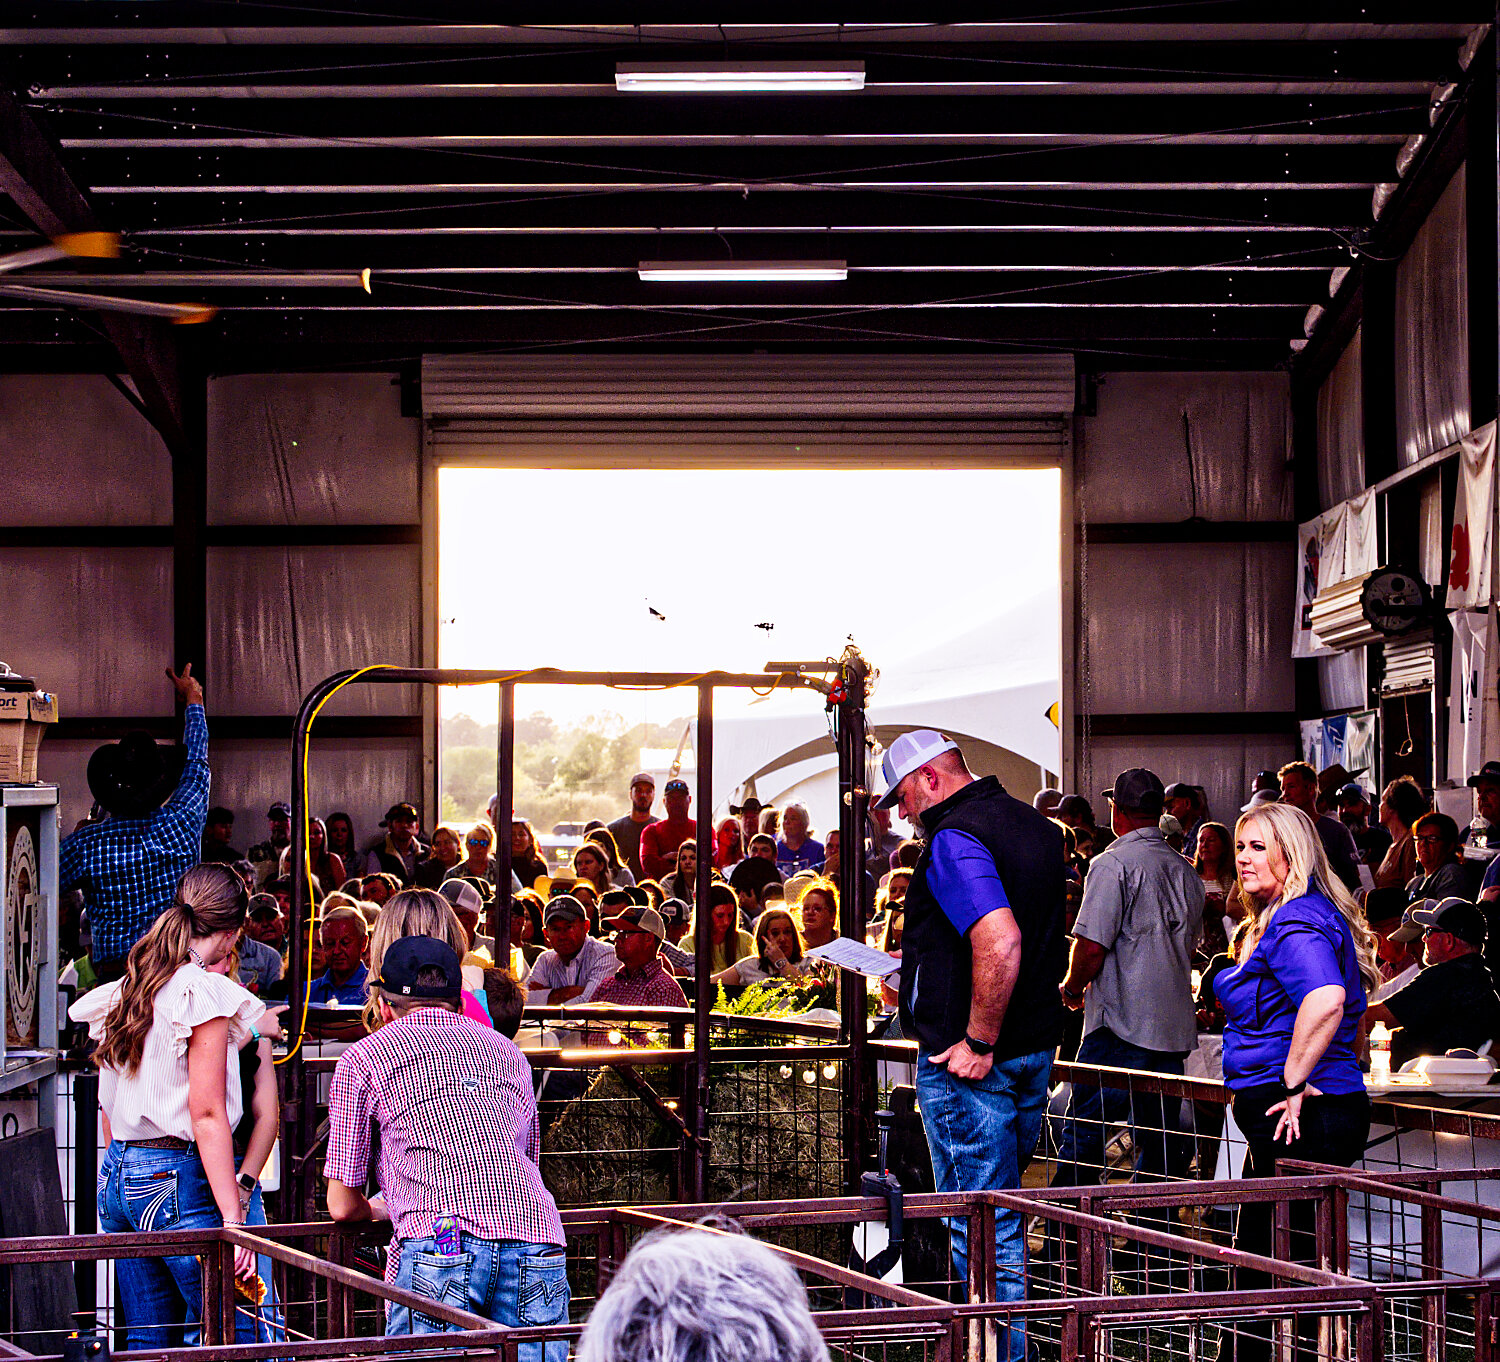 The auction barn in Quitman was brimming to capacity with bidders, supporters, and more last Friday.